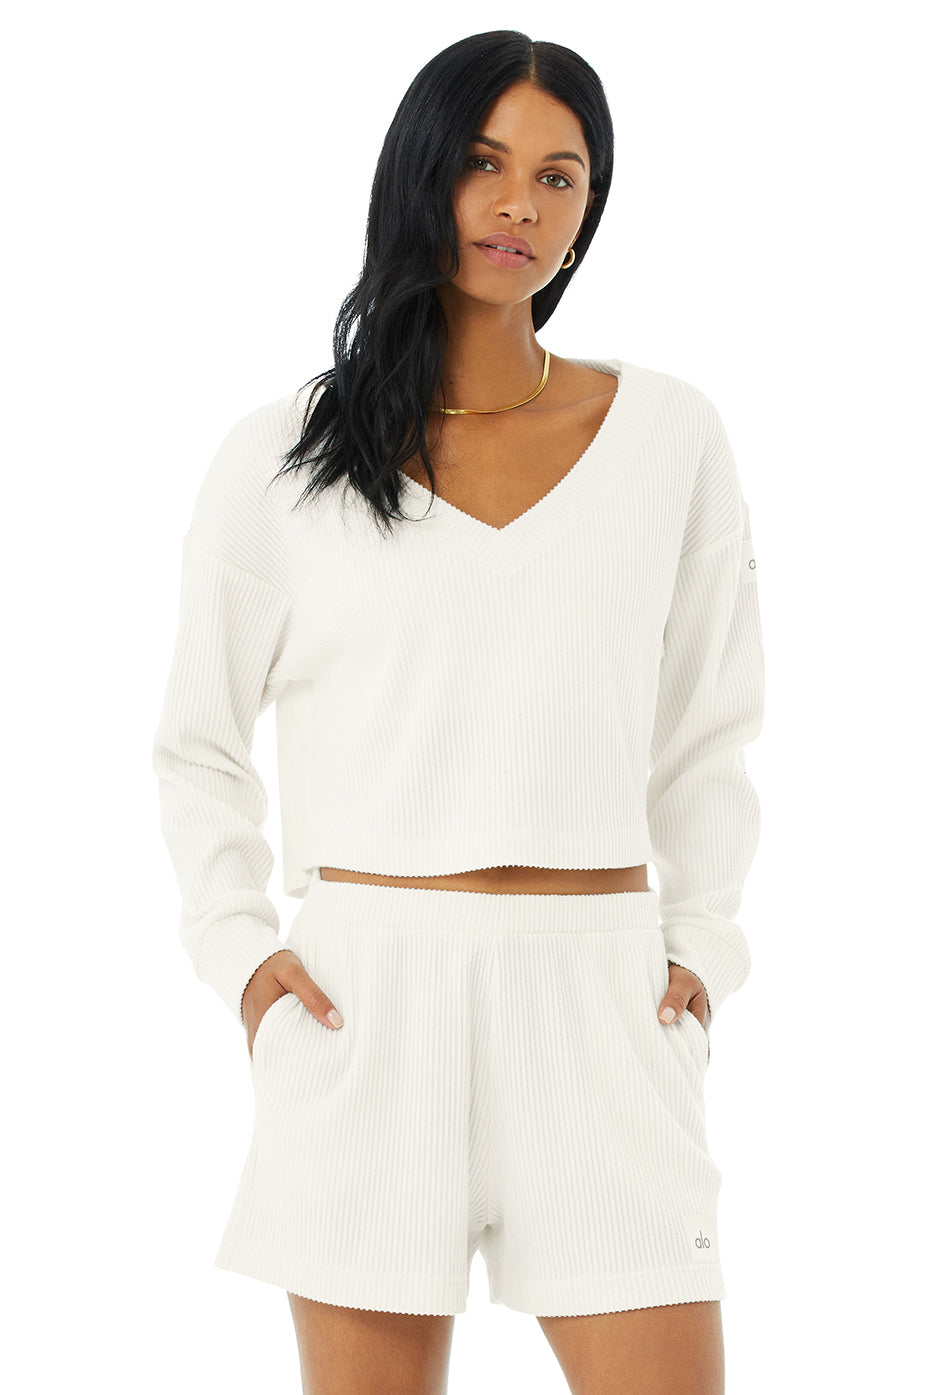 Muse V-Neck Pullover Top in Ivory by Alo Yoga - International Design Forum